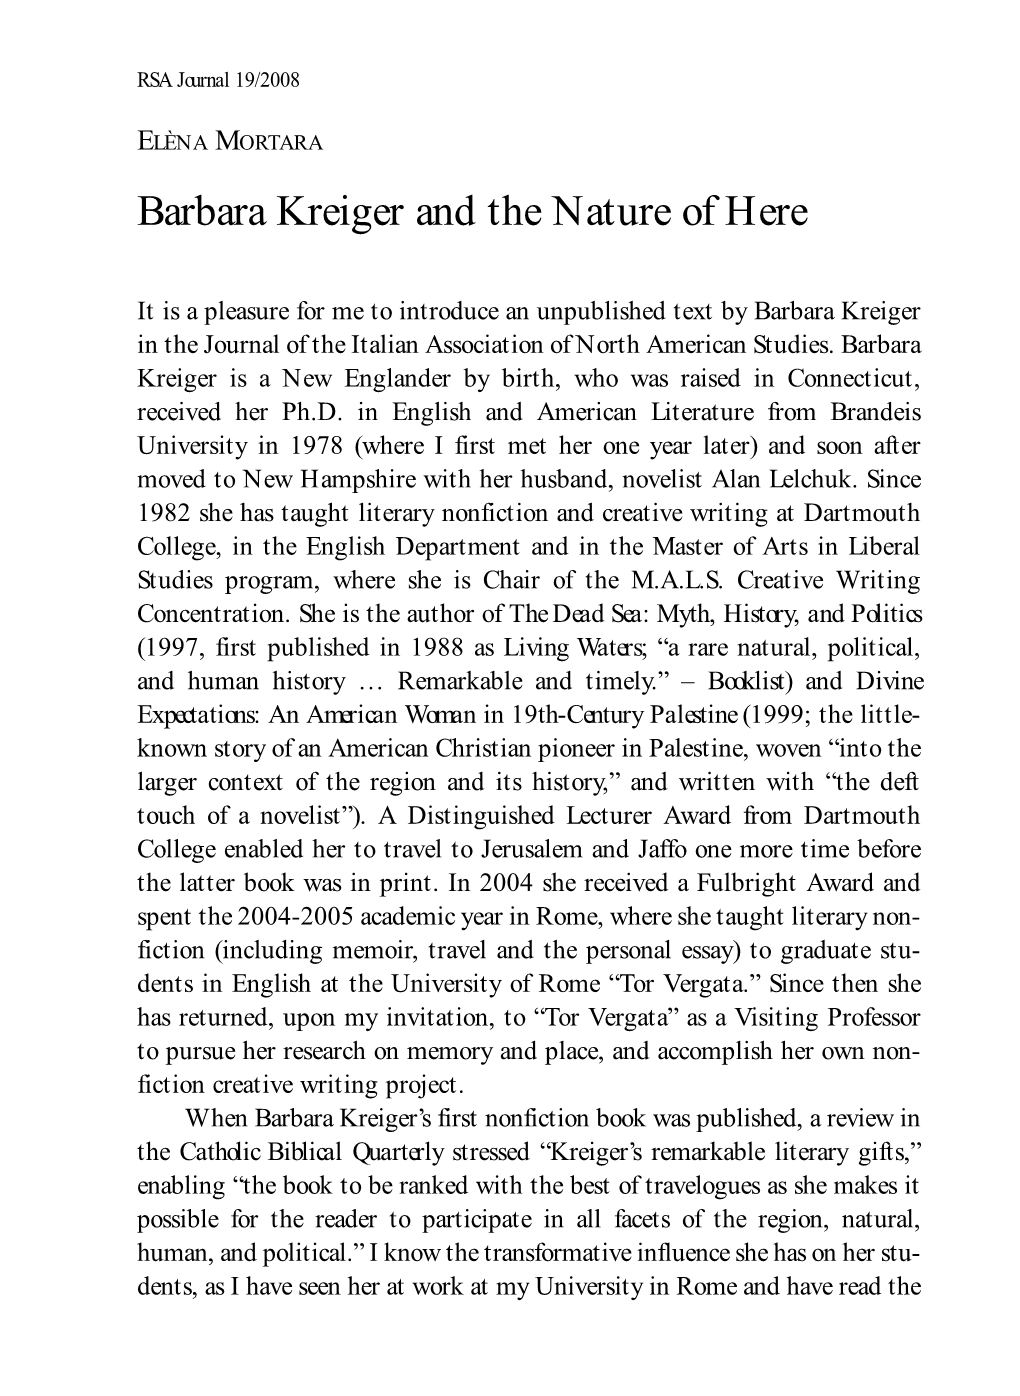 Barbara Kreiger and the Nature of Here